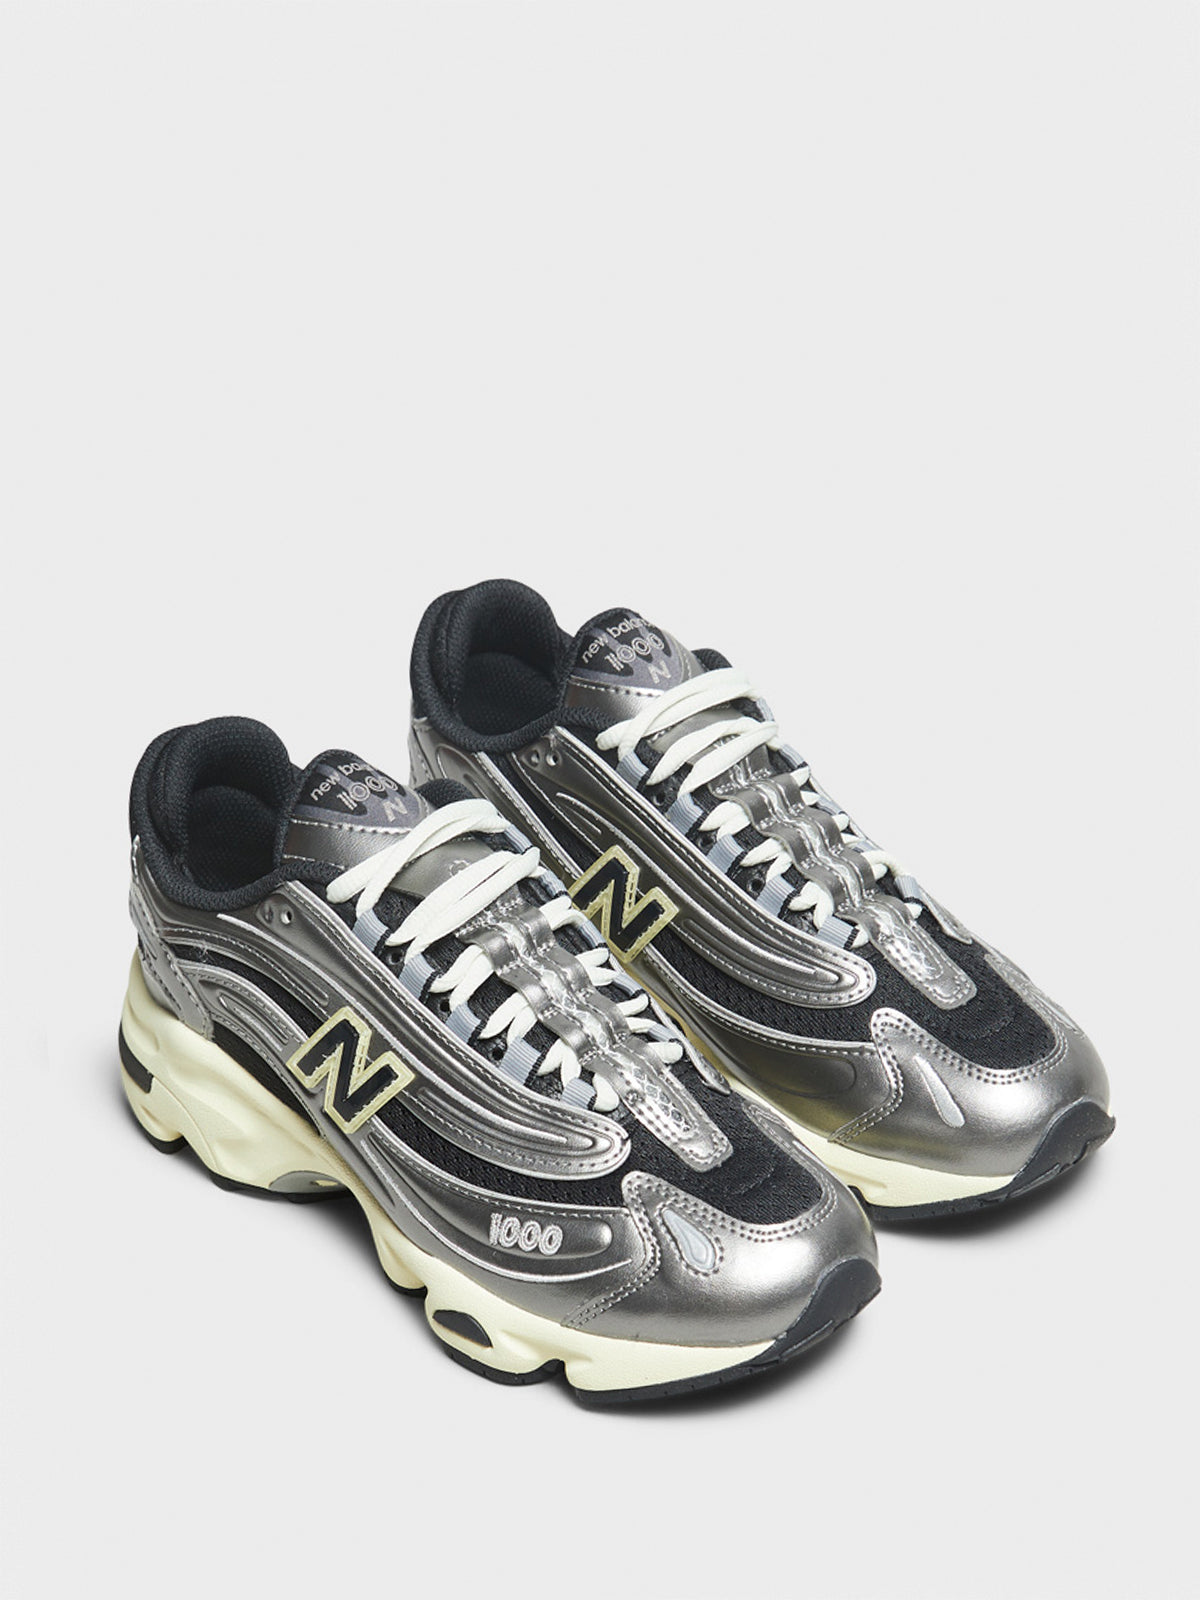 M1000SL Sneakers in Grey and Black